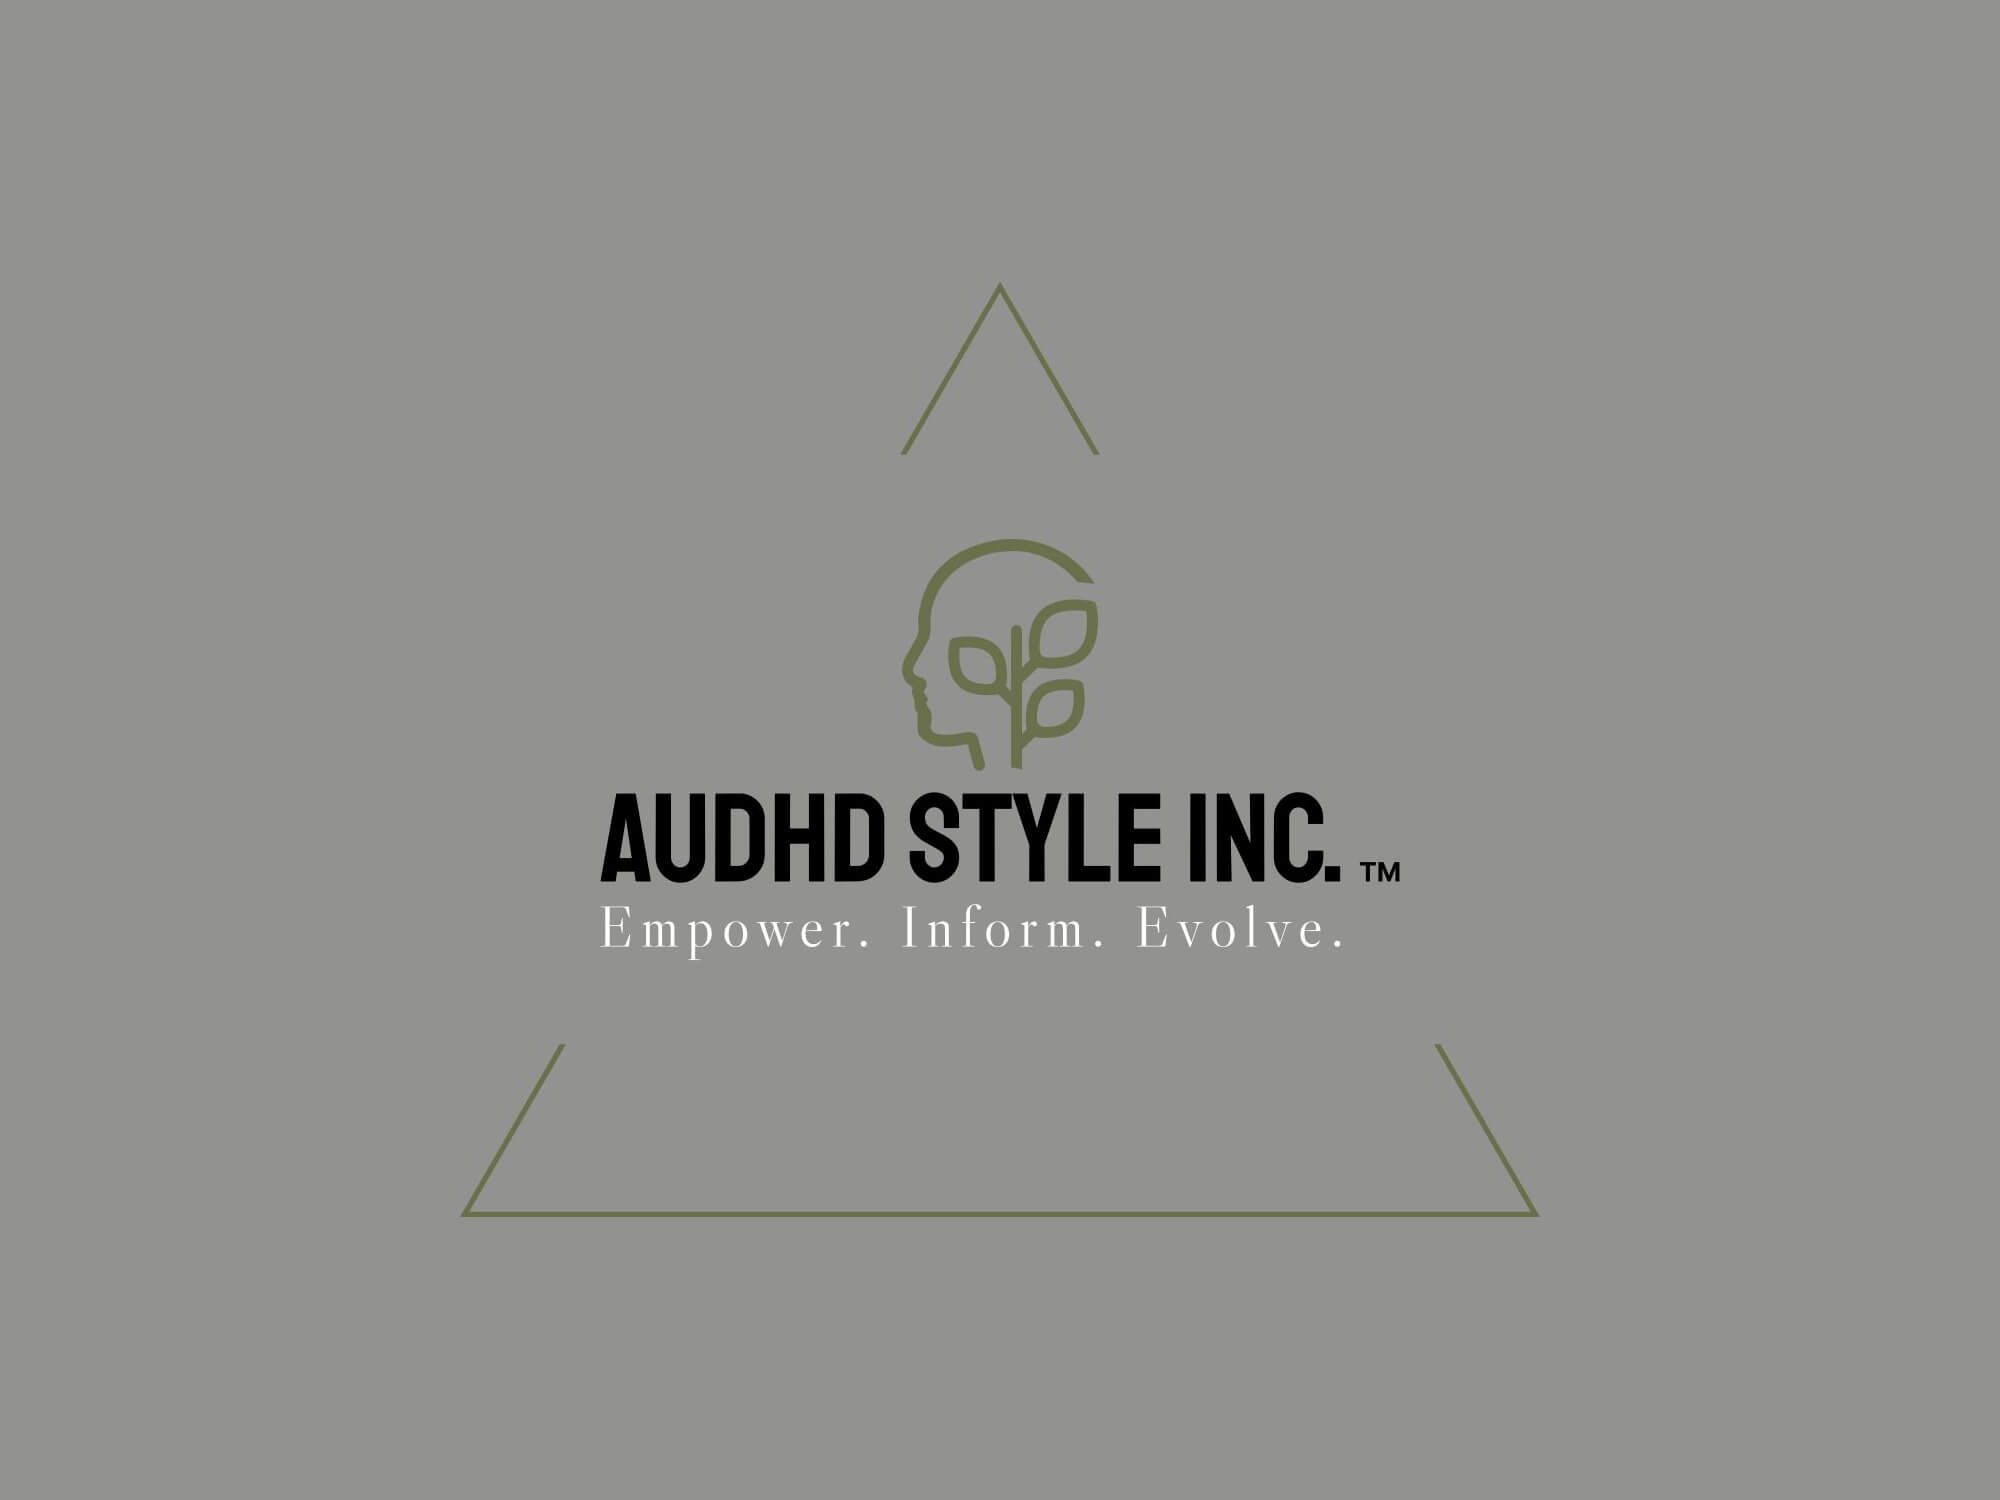 AUDHD STYLE INC